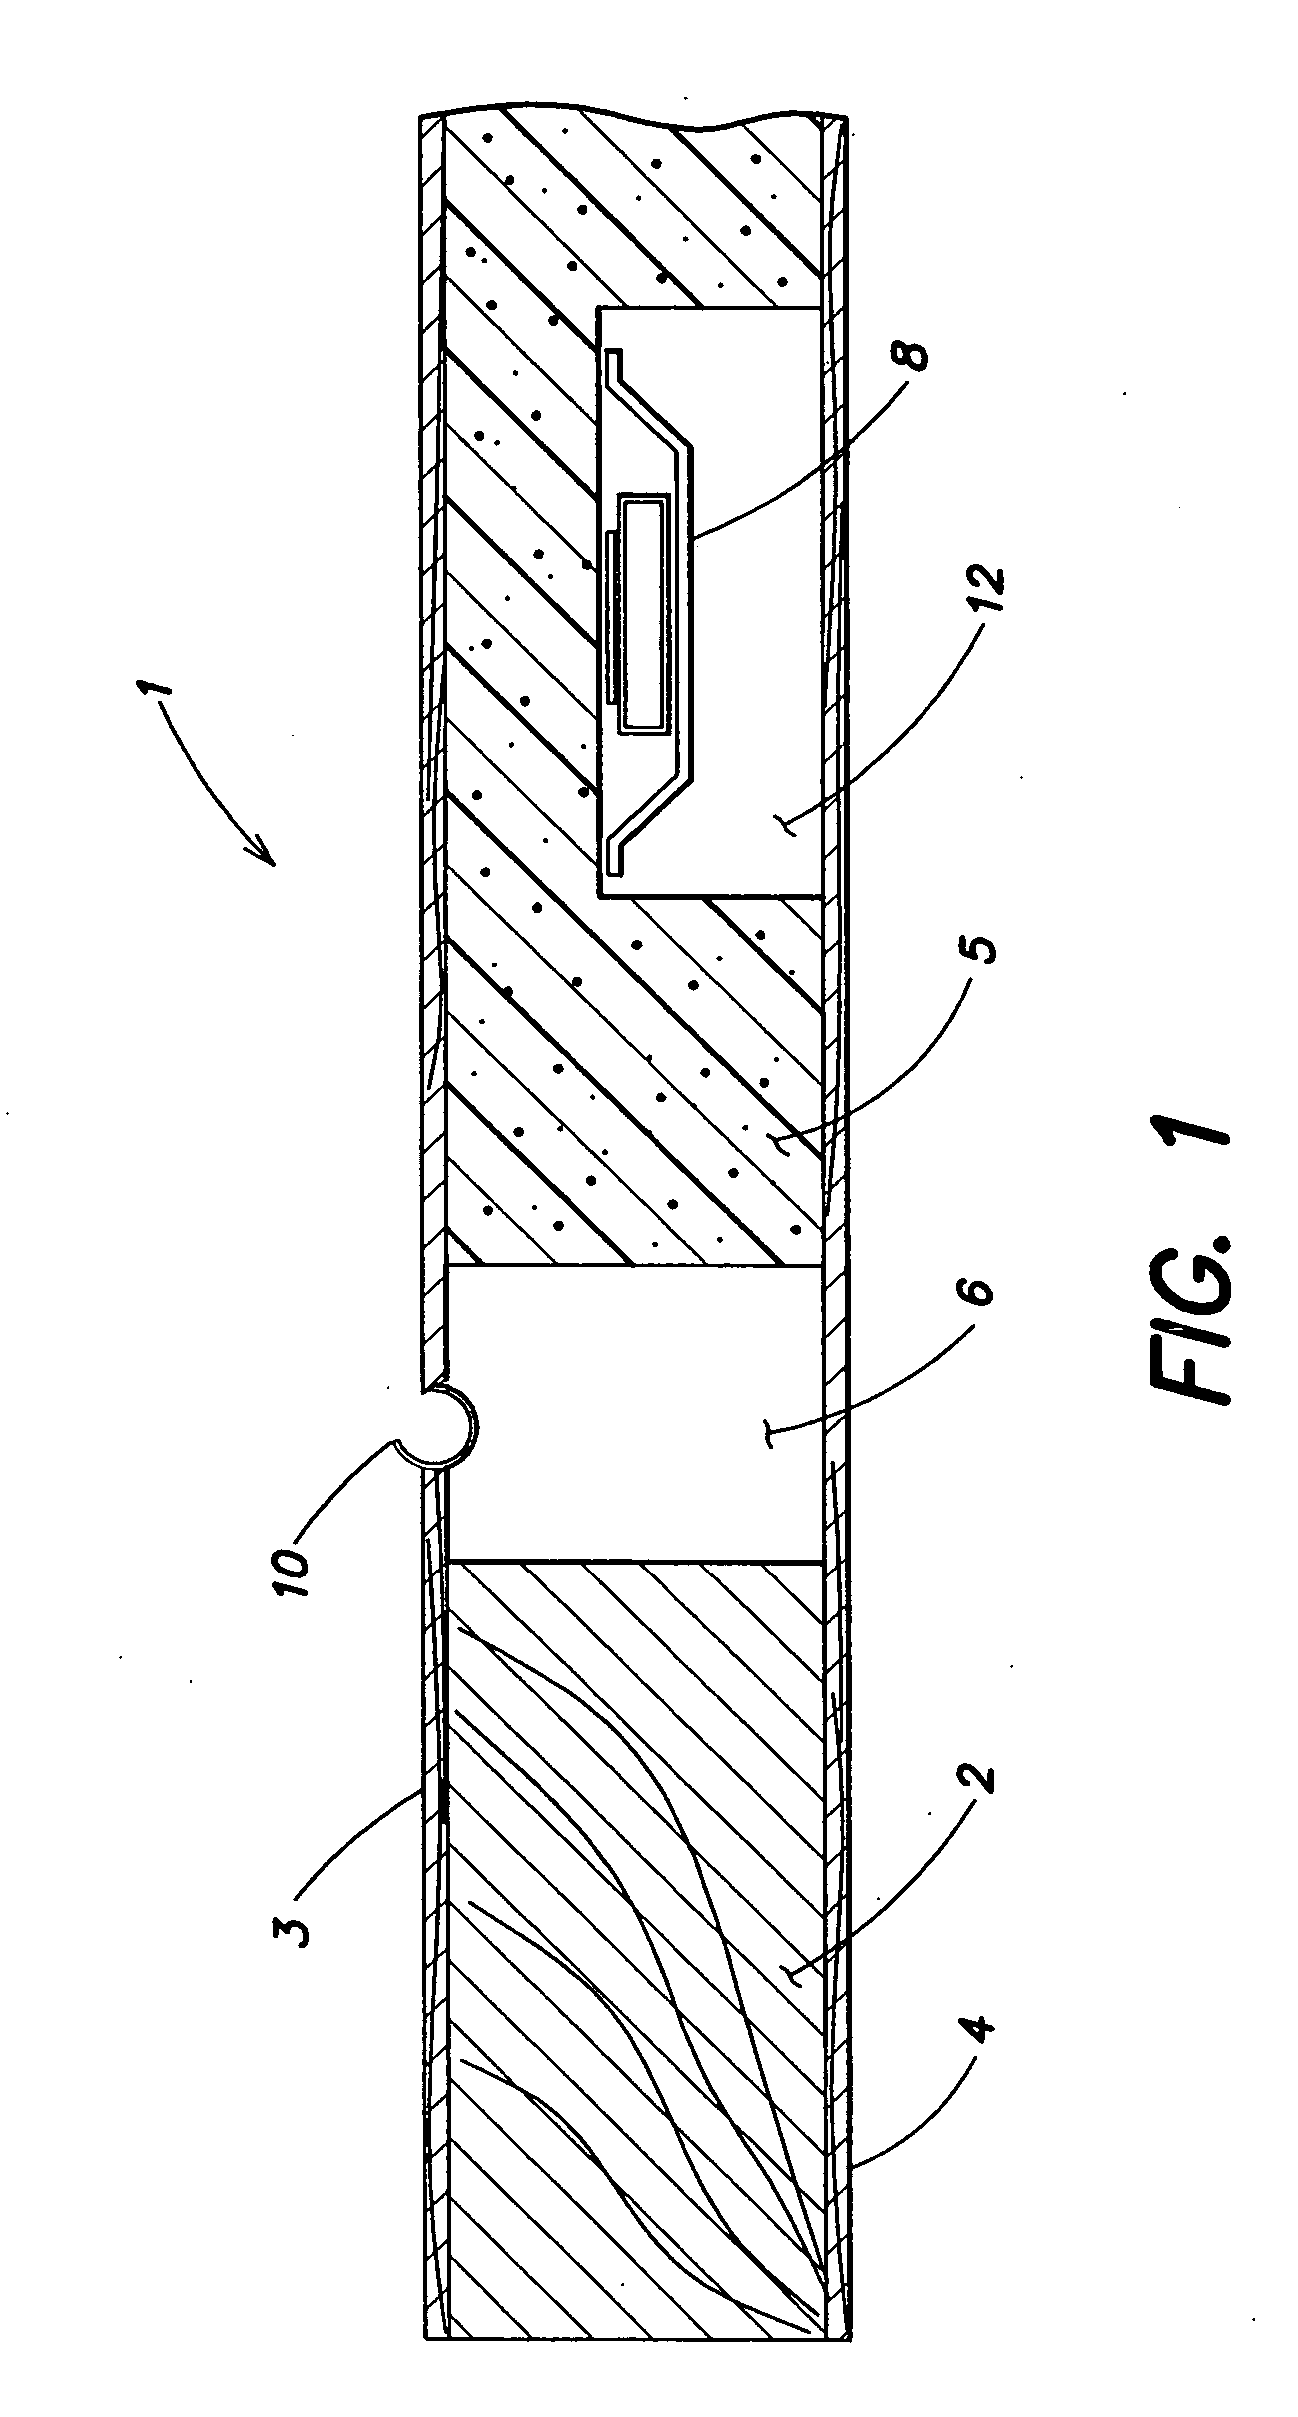 Door with structural components configured to radiate acoustic energy